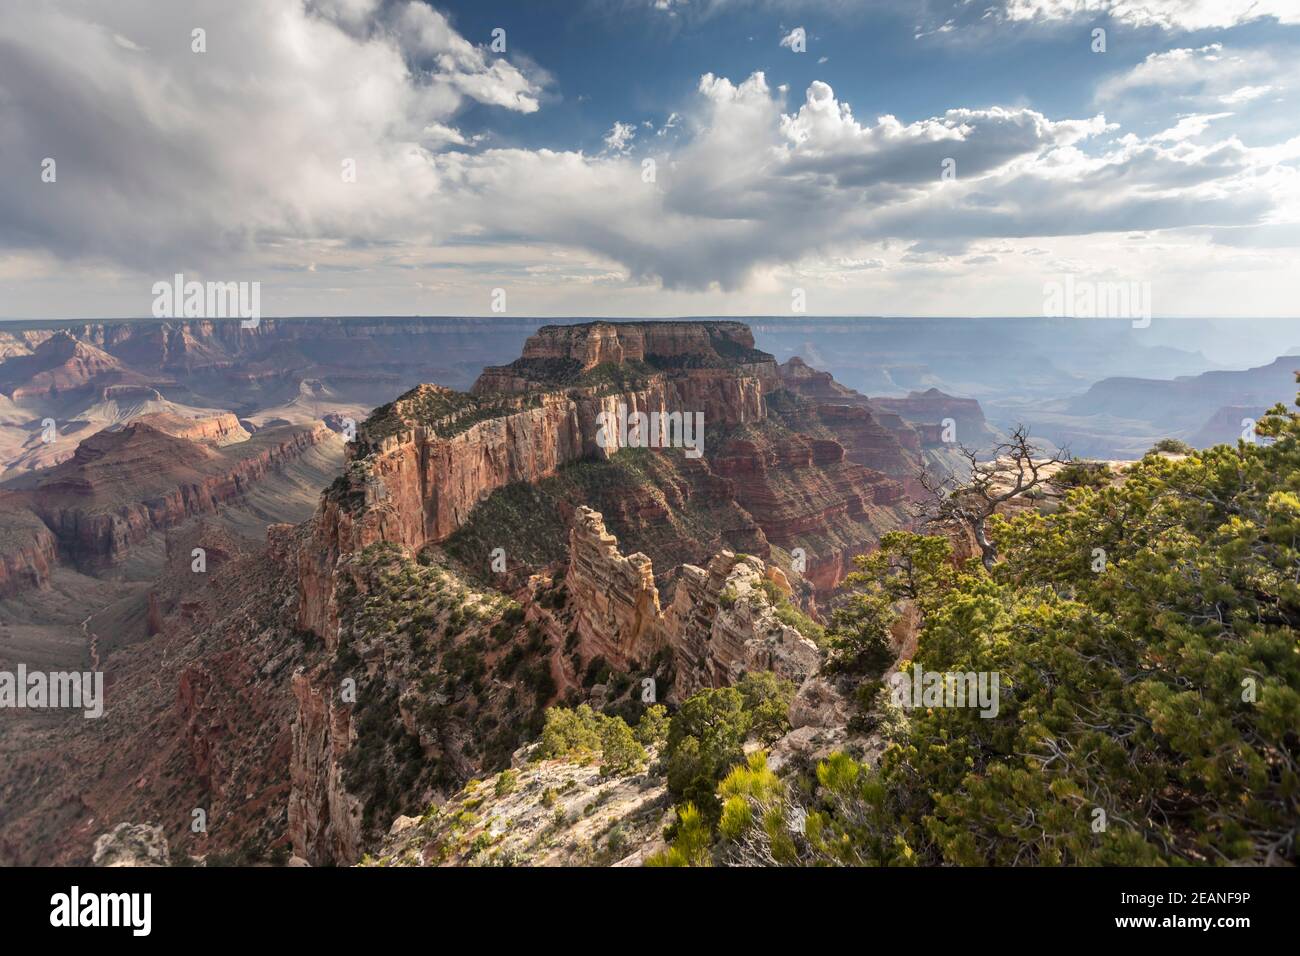 View from Cape Royal Point of the north rim of Grand Canyon National Park, UNESCO World Heritage Site, Arizona, United States of America Stock Photo